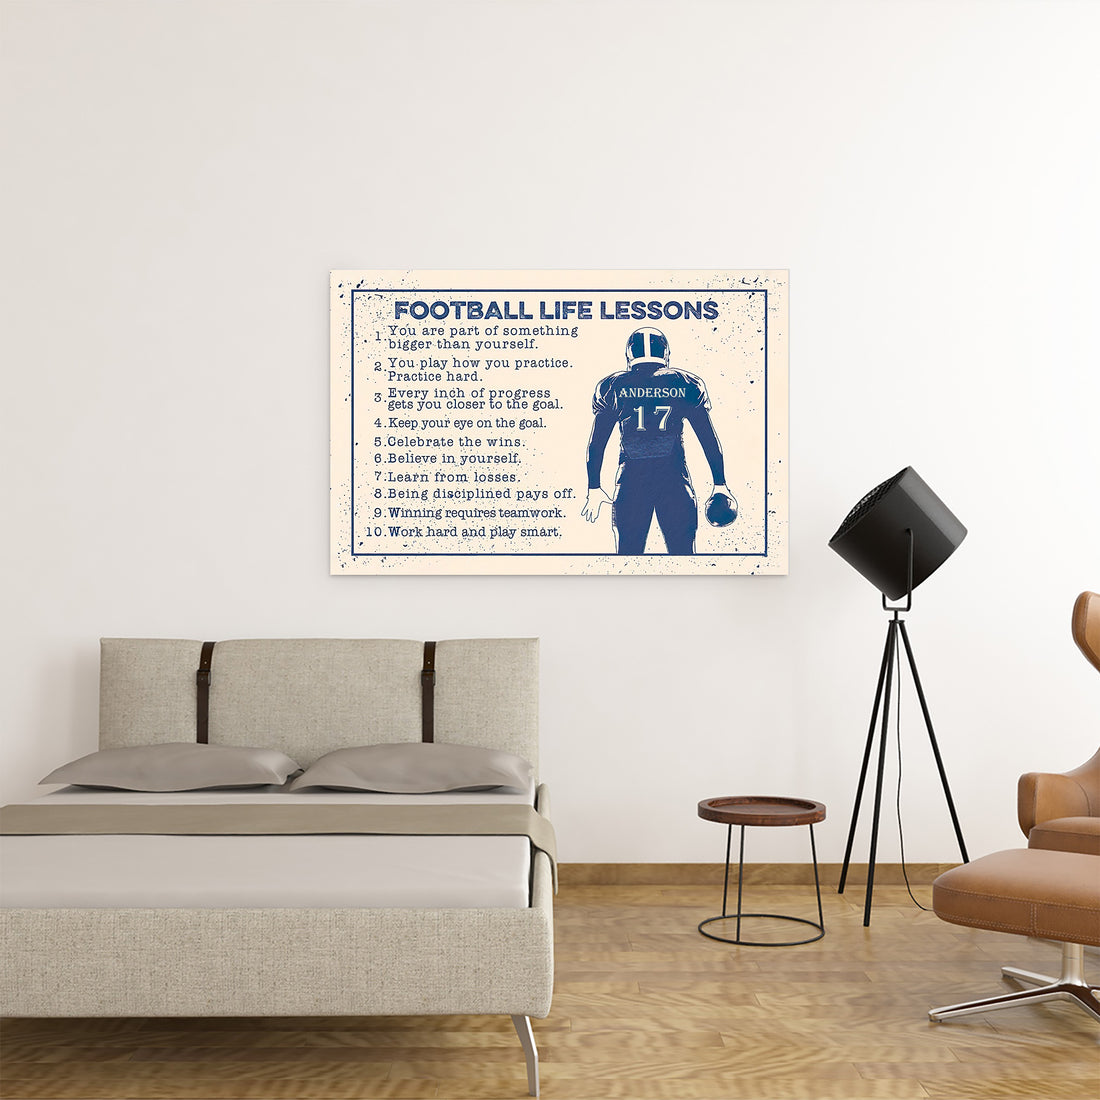 Canvas Wall Art, Footbal Life Lessons Poster, Inspirational Football Quotes, Gift For Boyfriend, Football Player, Sport Fan, Sport Gifts, Gifts Husband